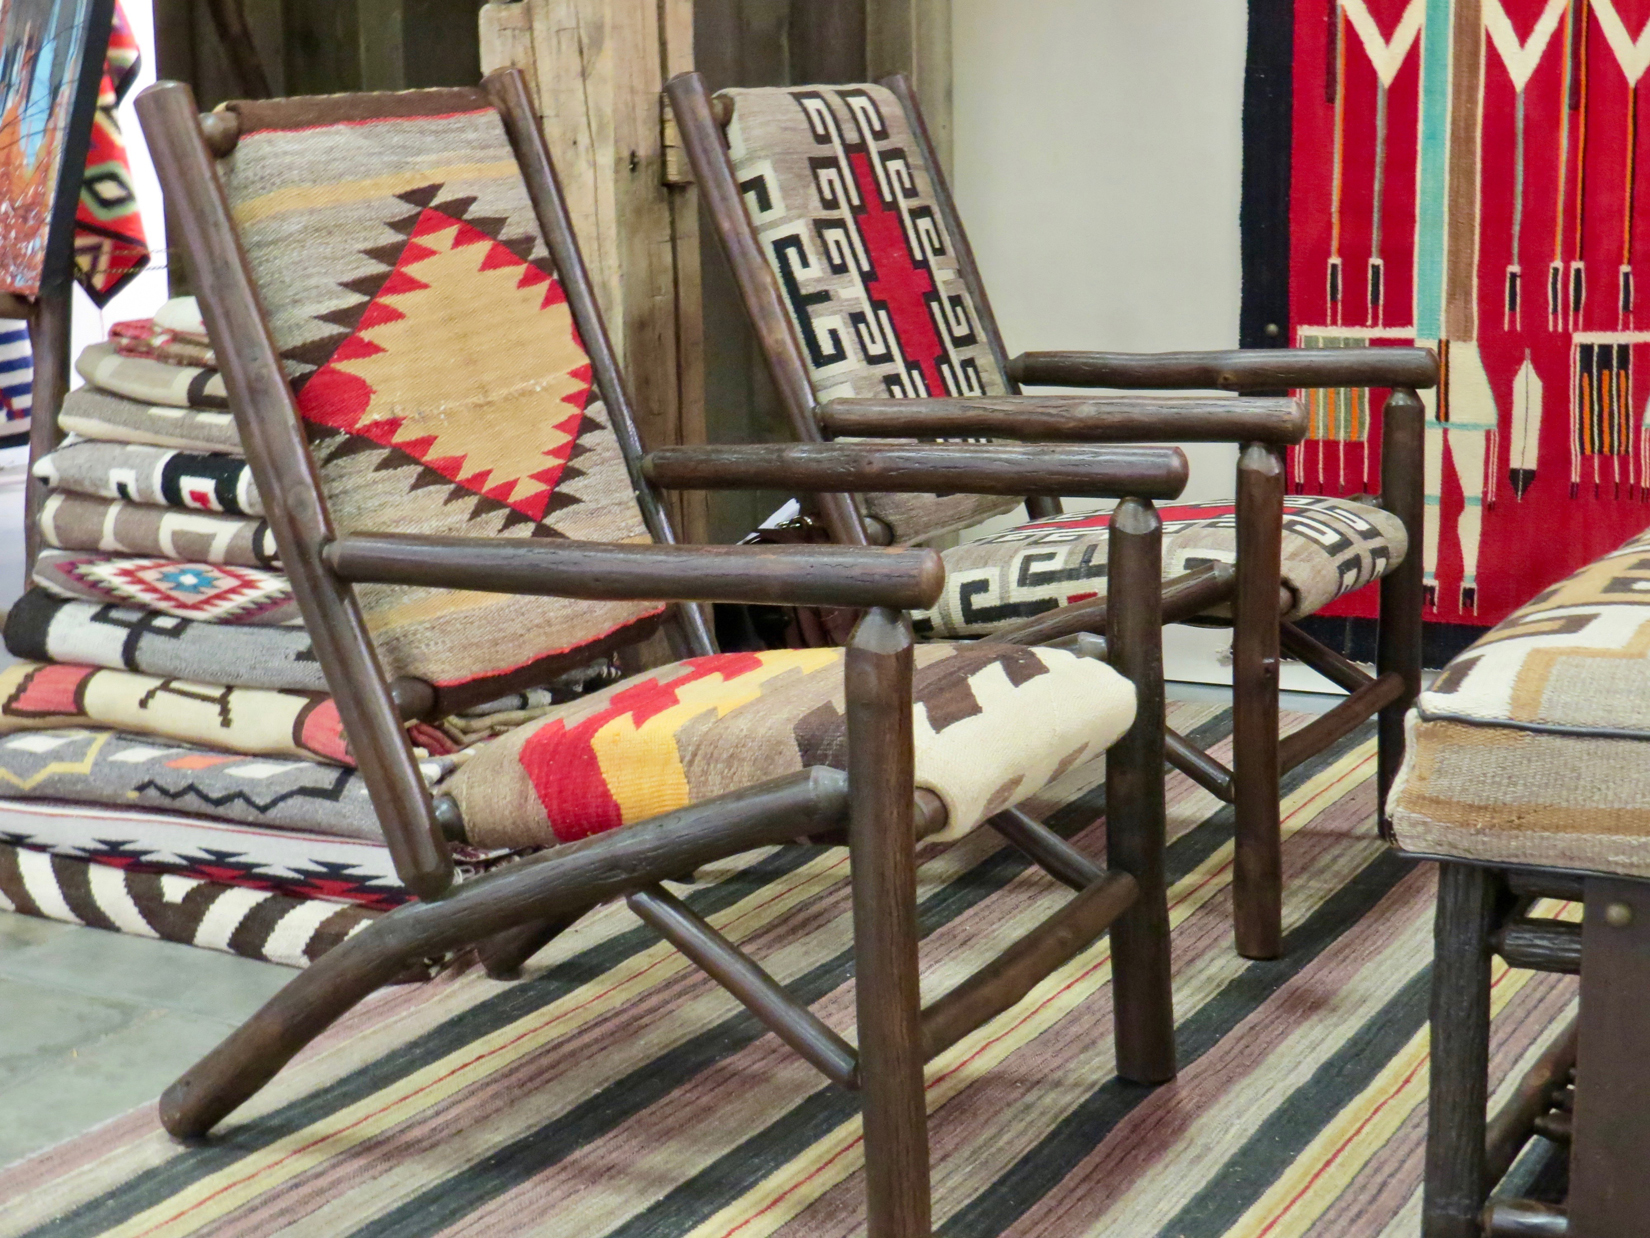 The Western Design Conference Exhibit + Sale showcases an extraordinary variety of furniture for the home such as these Pendleton-upholstered chairs by Old Hickory Furniture Company.